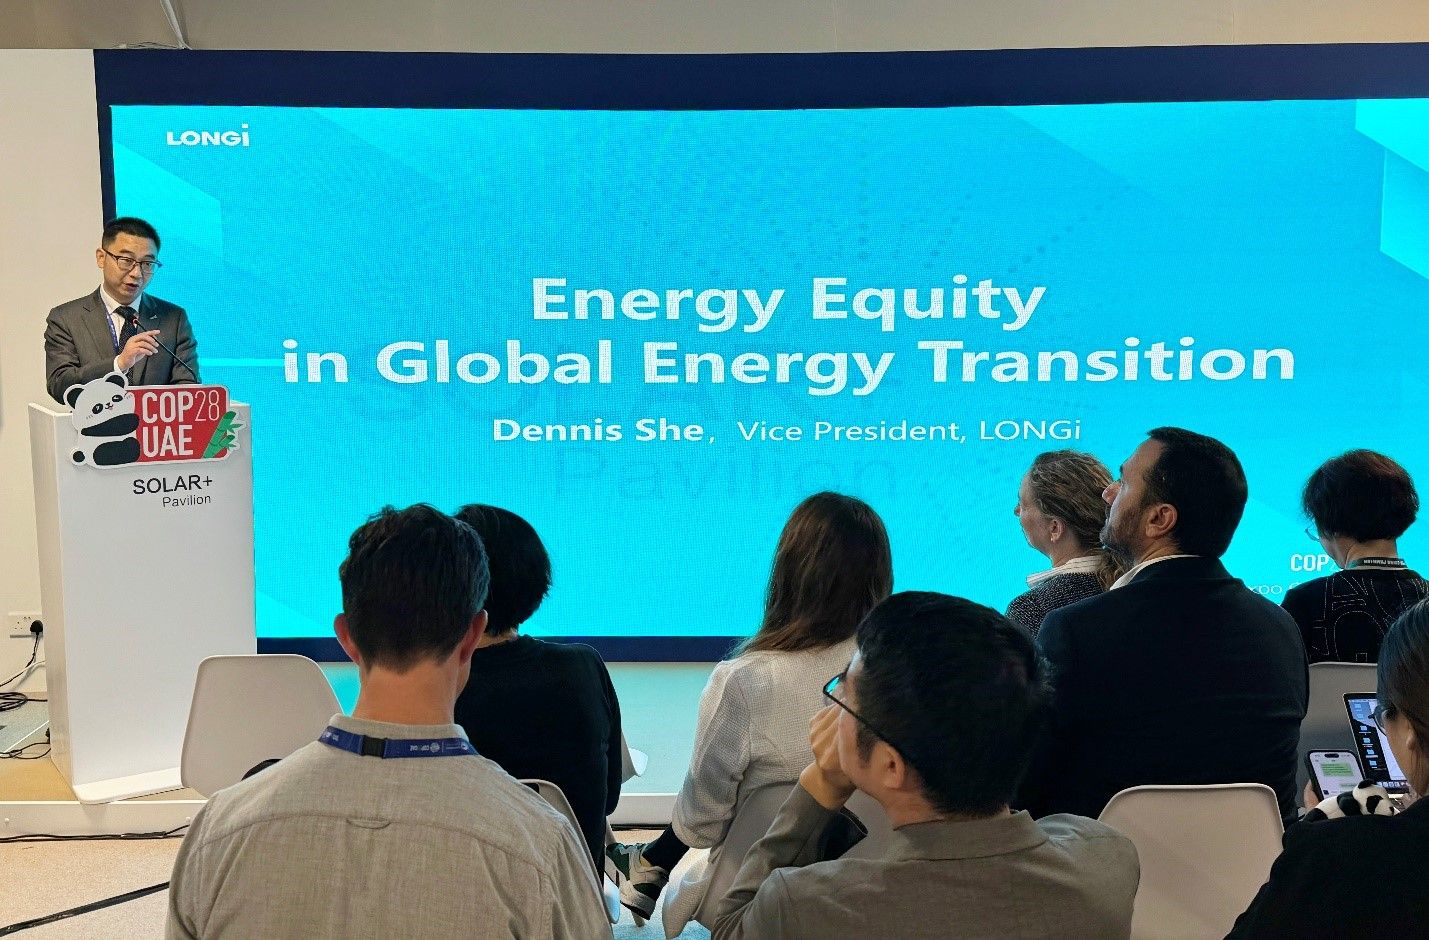 Dennis She, Vice President of LONGi, delivered a keynote speech “Solar for All” at the Solar+ Pavilion during the COP 28 conference